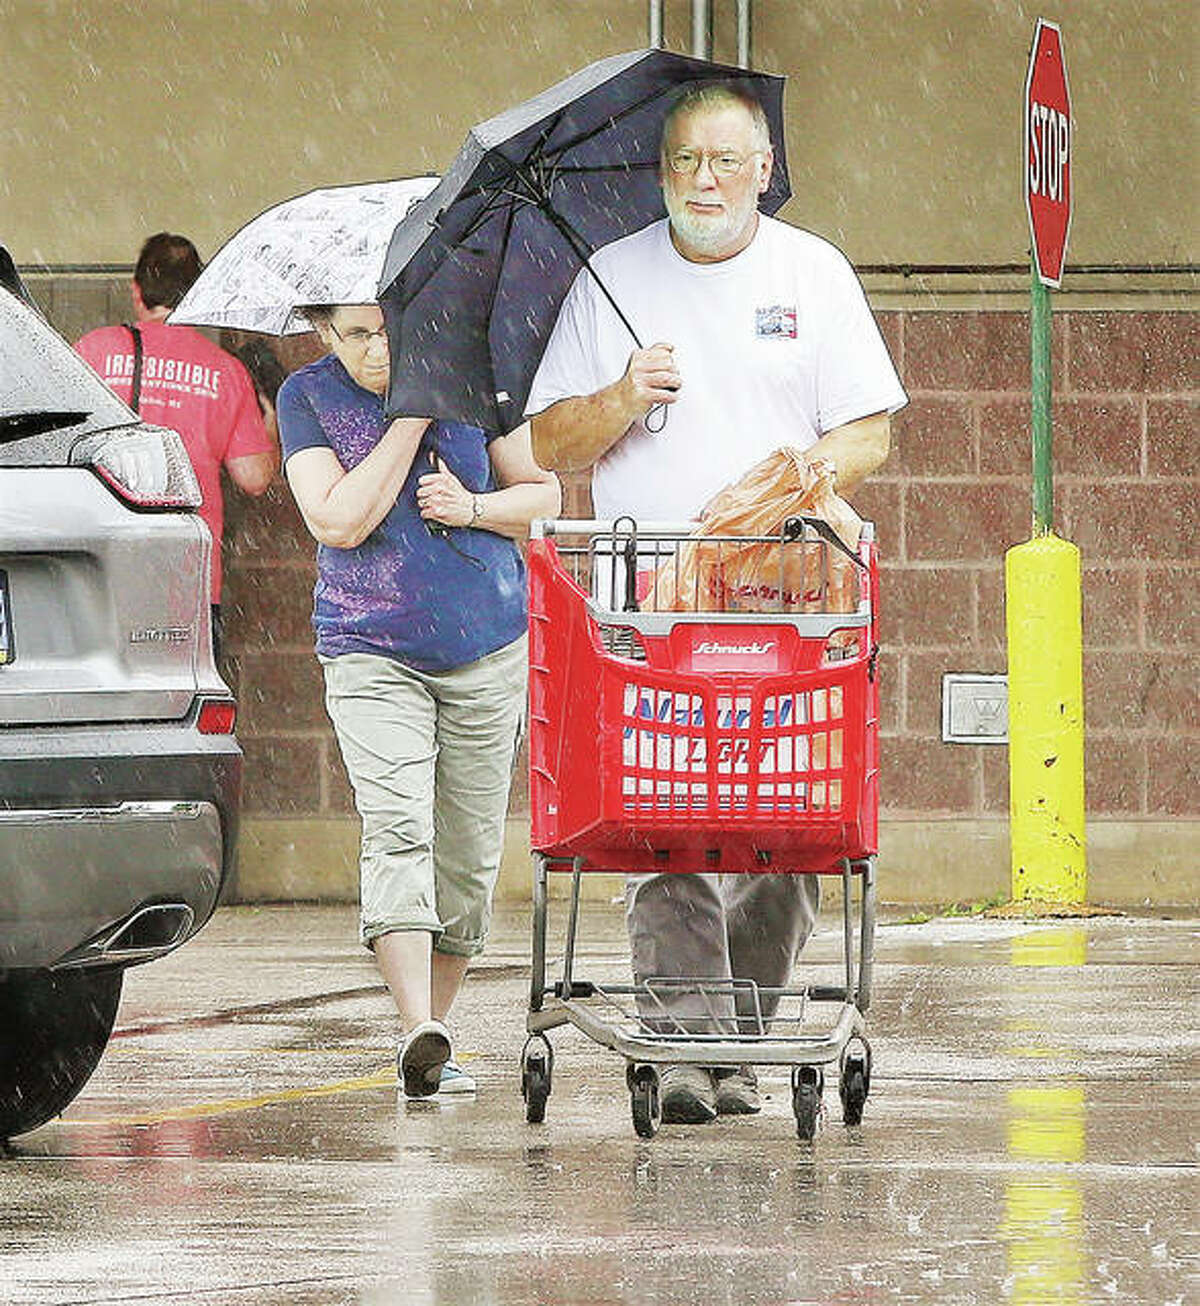 As the Carpenters once said in a song, “Rainy days and Mondays always get me down.” This couple had both as they made a dash to their vehicle with their groceries in the pouring rain at the Alton Schnucks store in the 1700 block of Homer Adams Parkway in Alton. After more rain today, forecasts call for temperatures to skyrocket to the upper 90,s and near 100 degrees through Sunday.